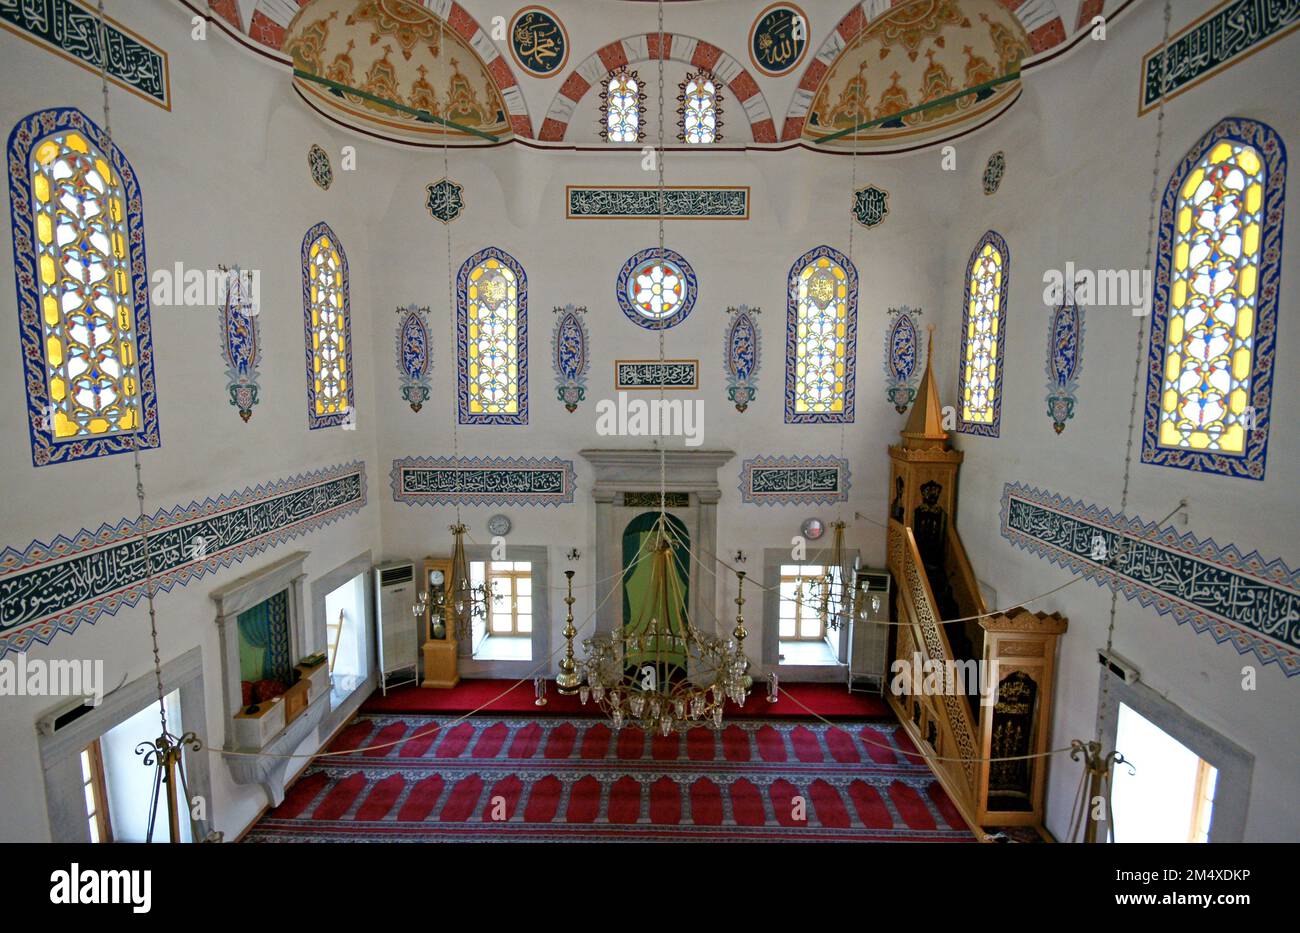 Located in Istanbul, Turkey, the Sepsefa Hatun Mosque was built in 1787. Stock Photo